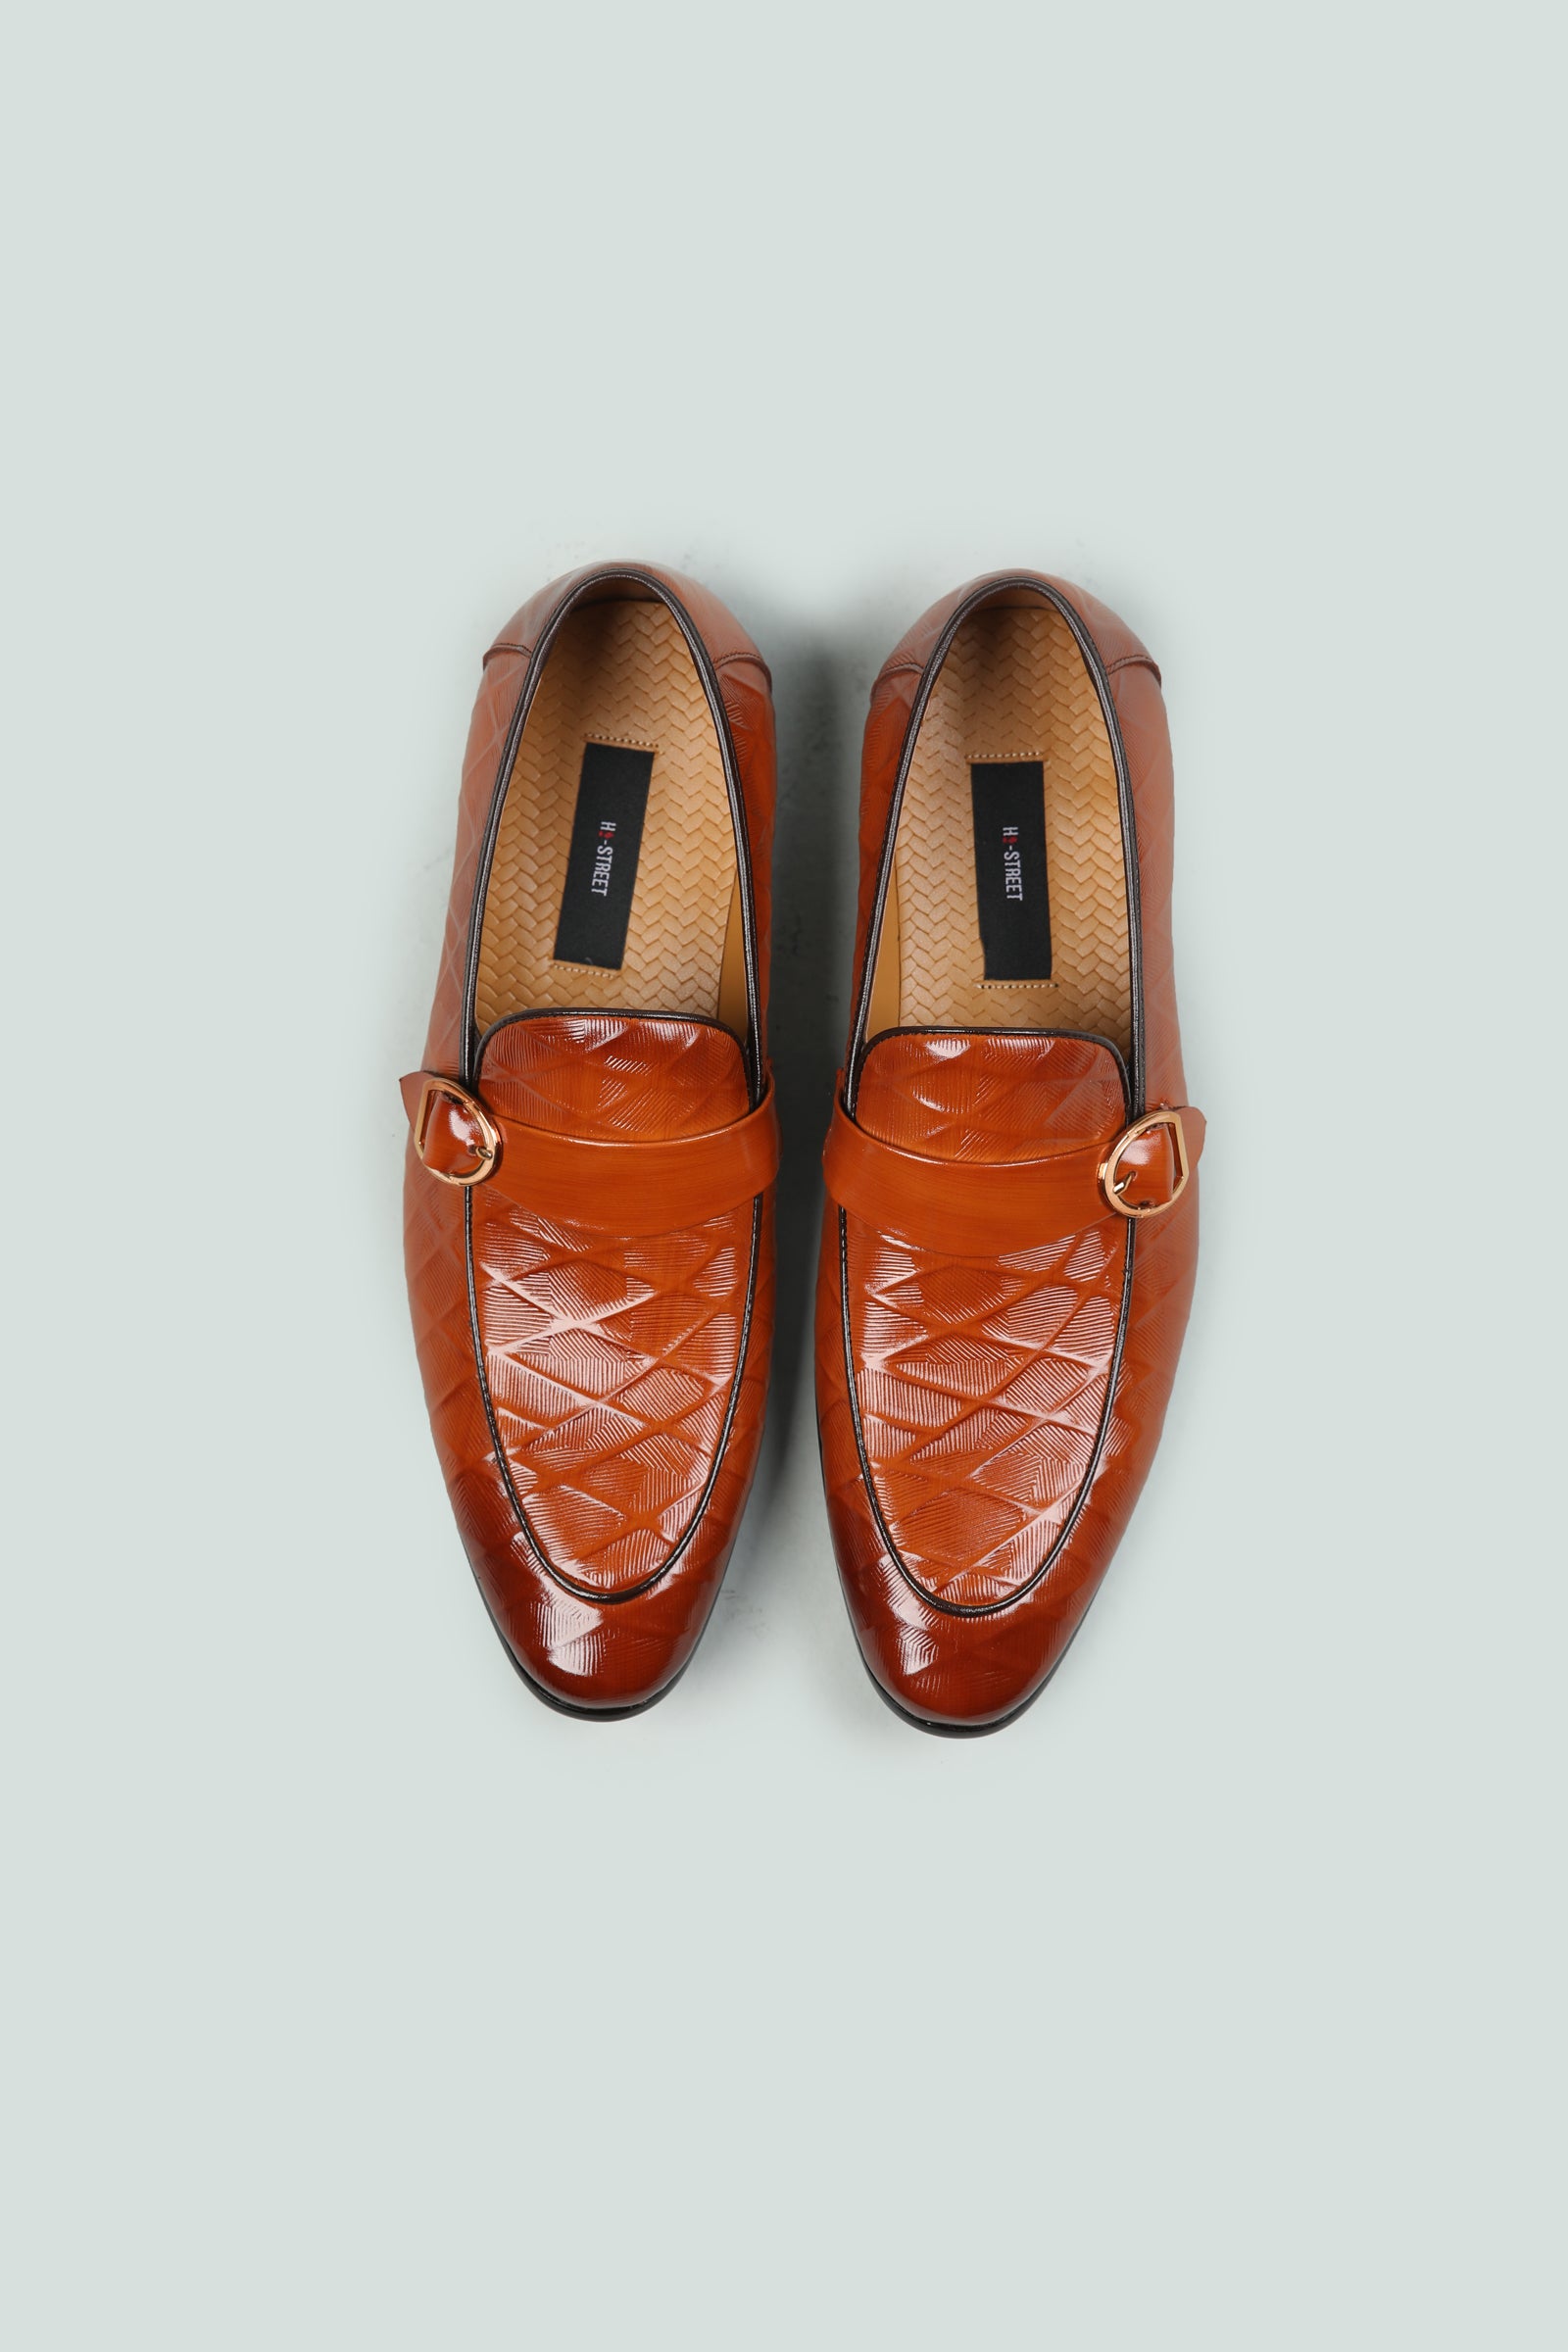 Patent Leather Smart Shoes